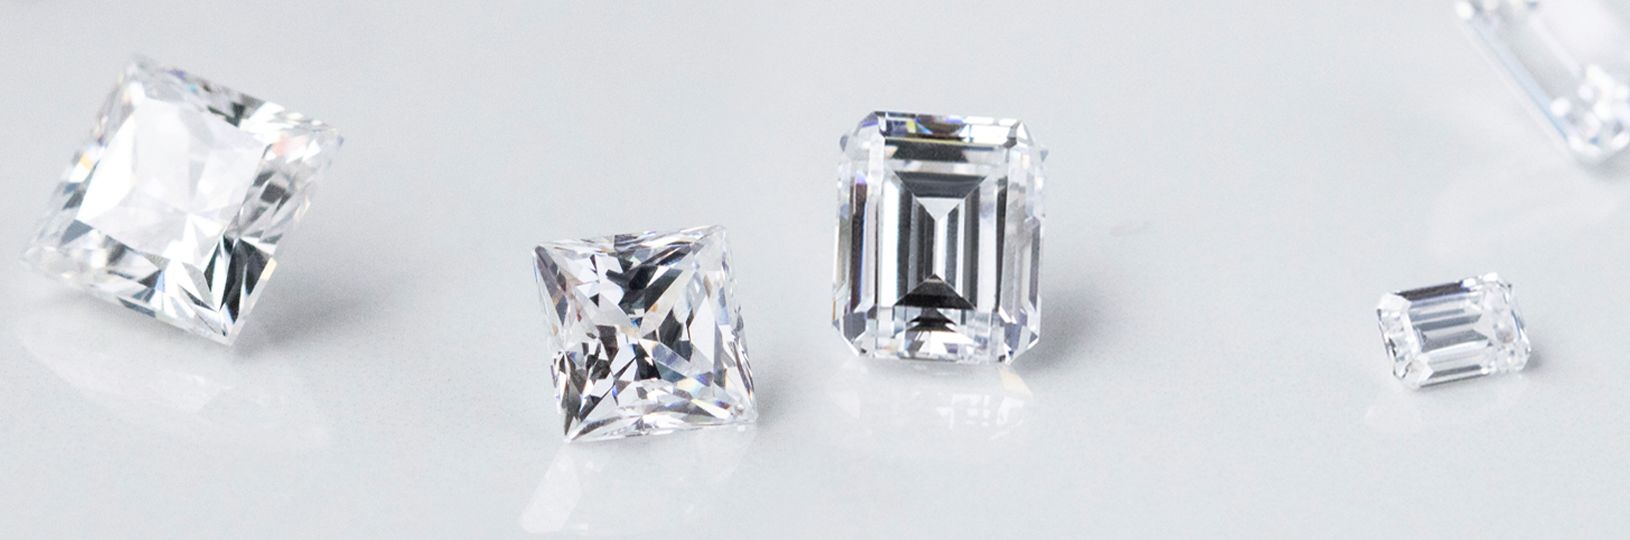 Several loose diamond simulants in different cuts and sizes